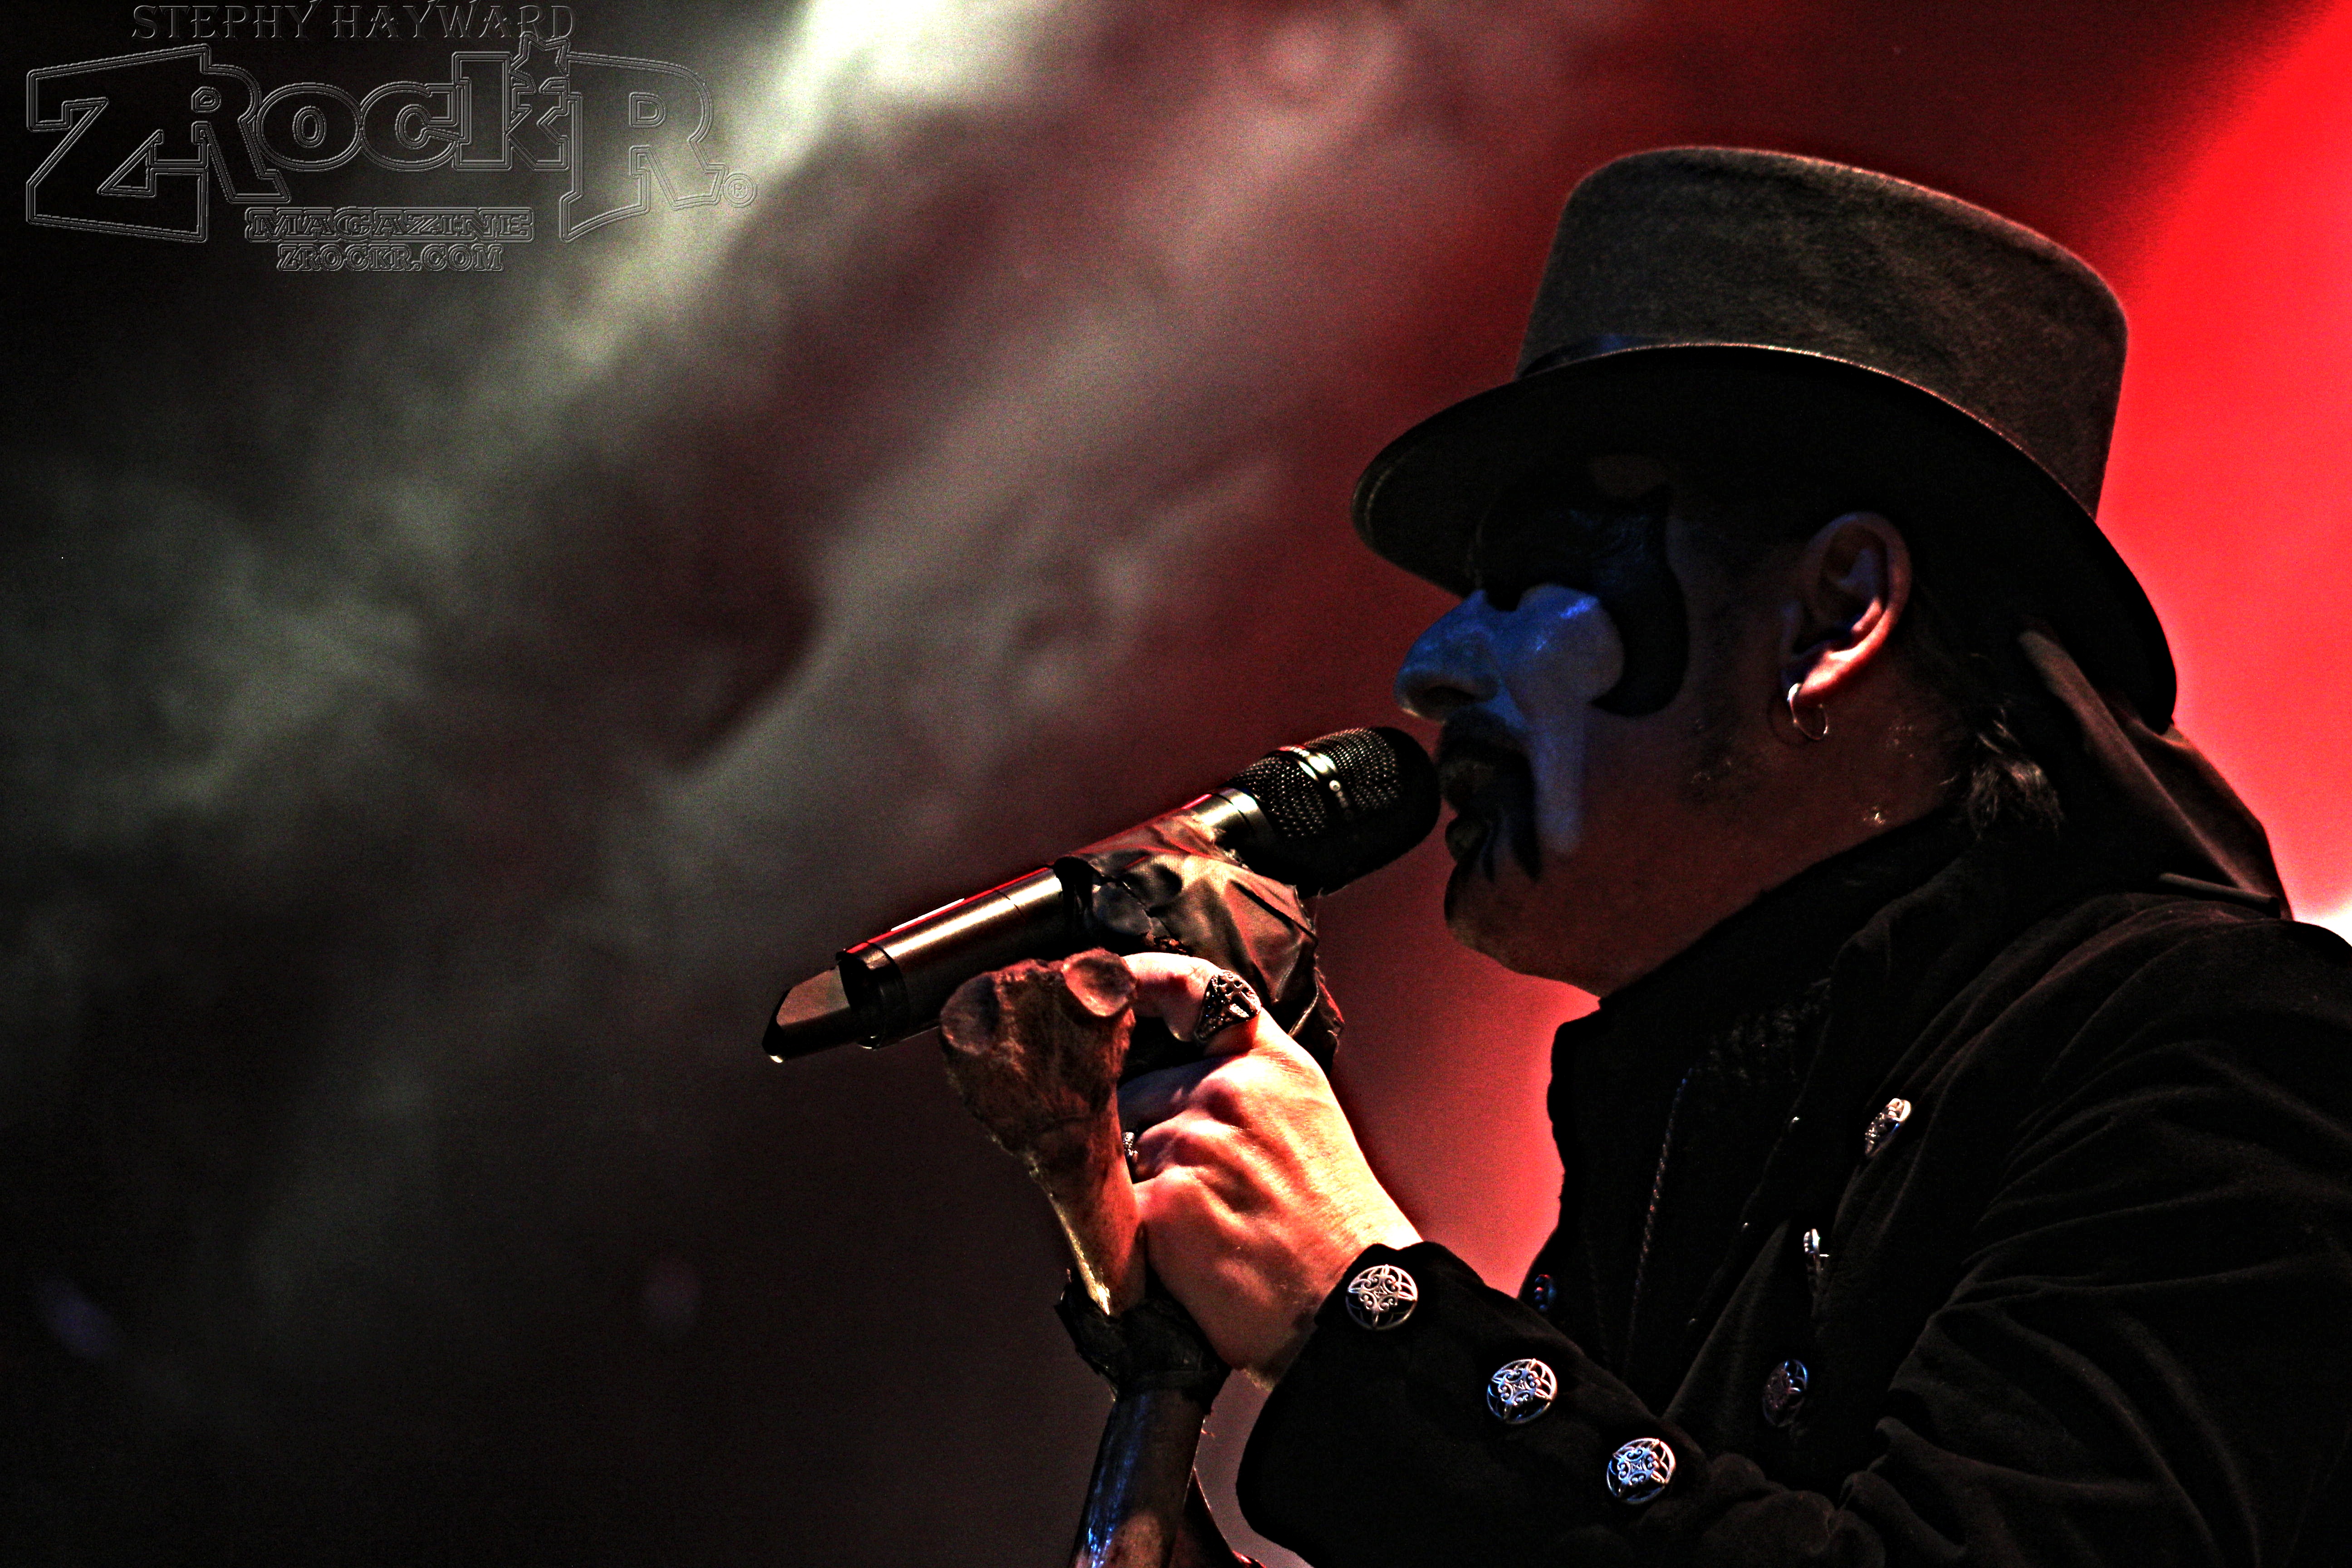 King Diamond Performs “Abigail” in its Entirety!